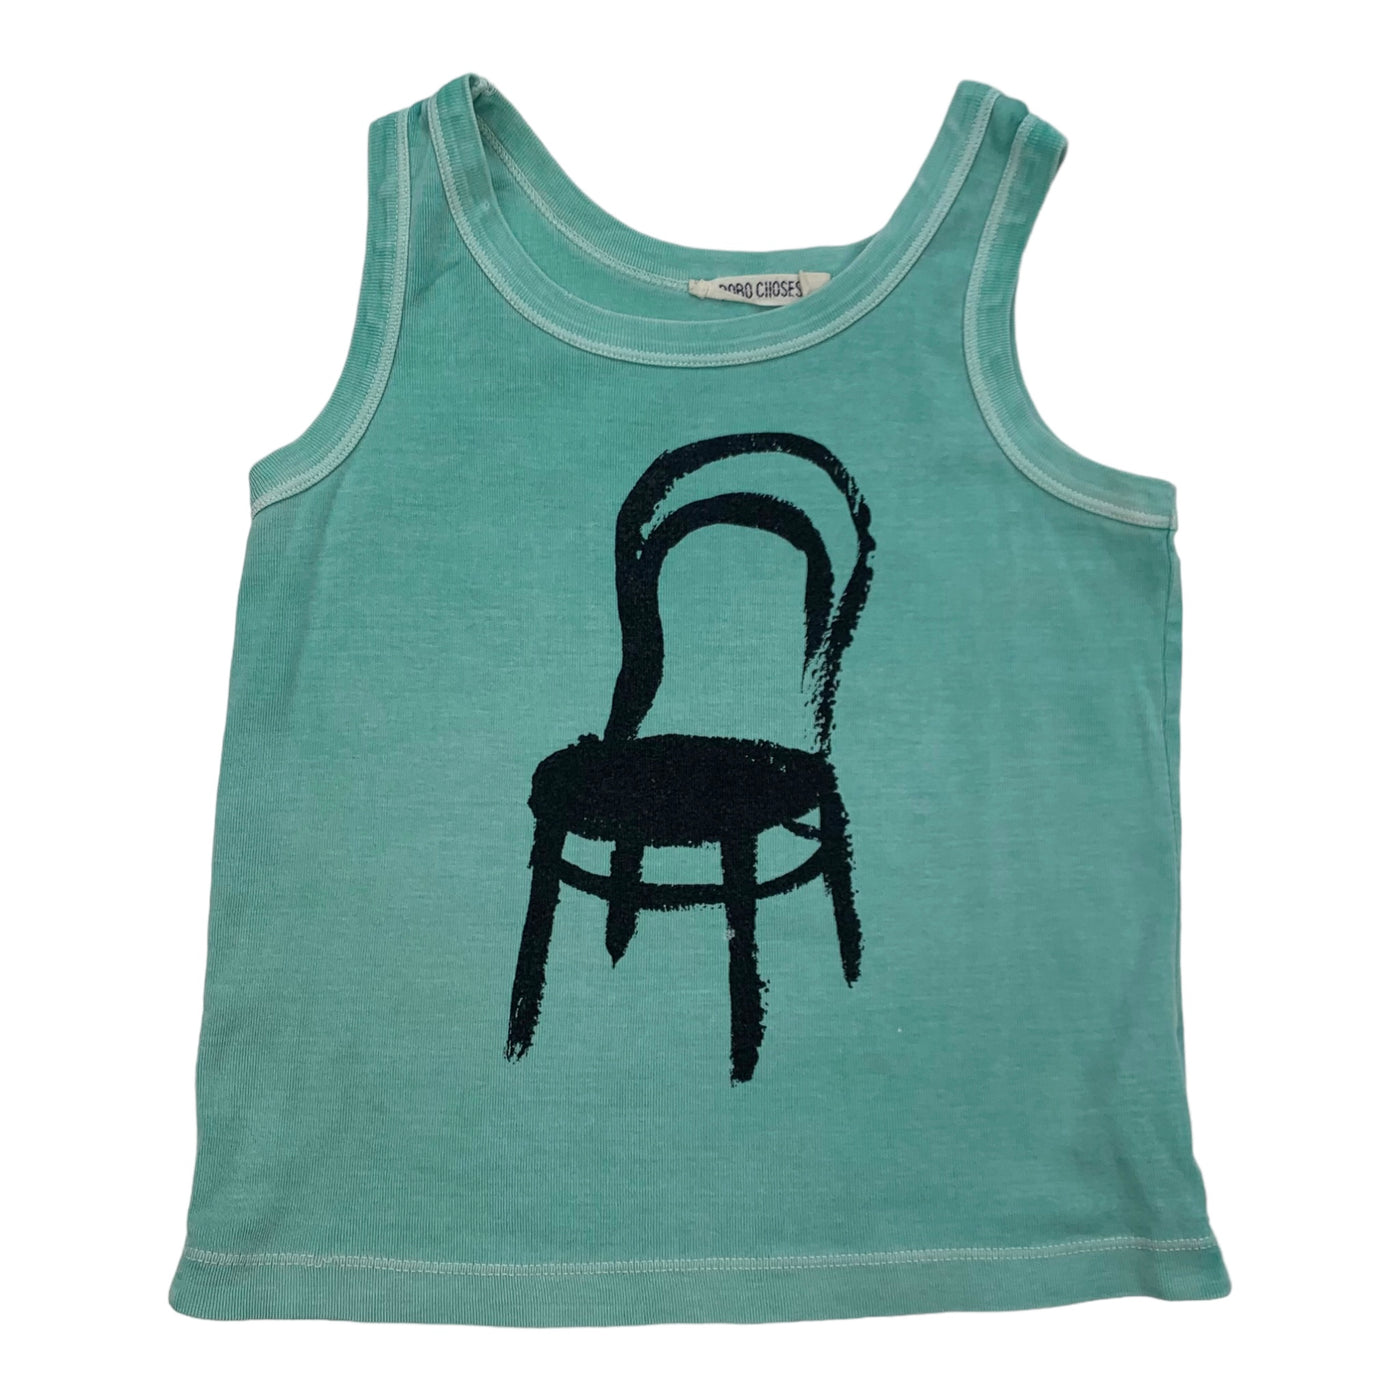 Bobo choses singlet green chair size 6 - 7 years